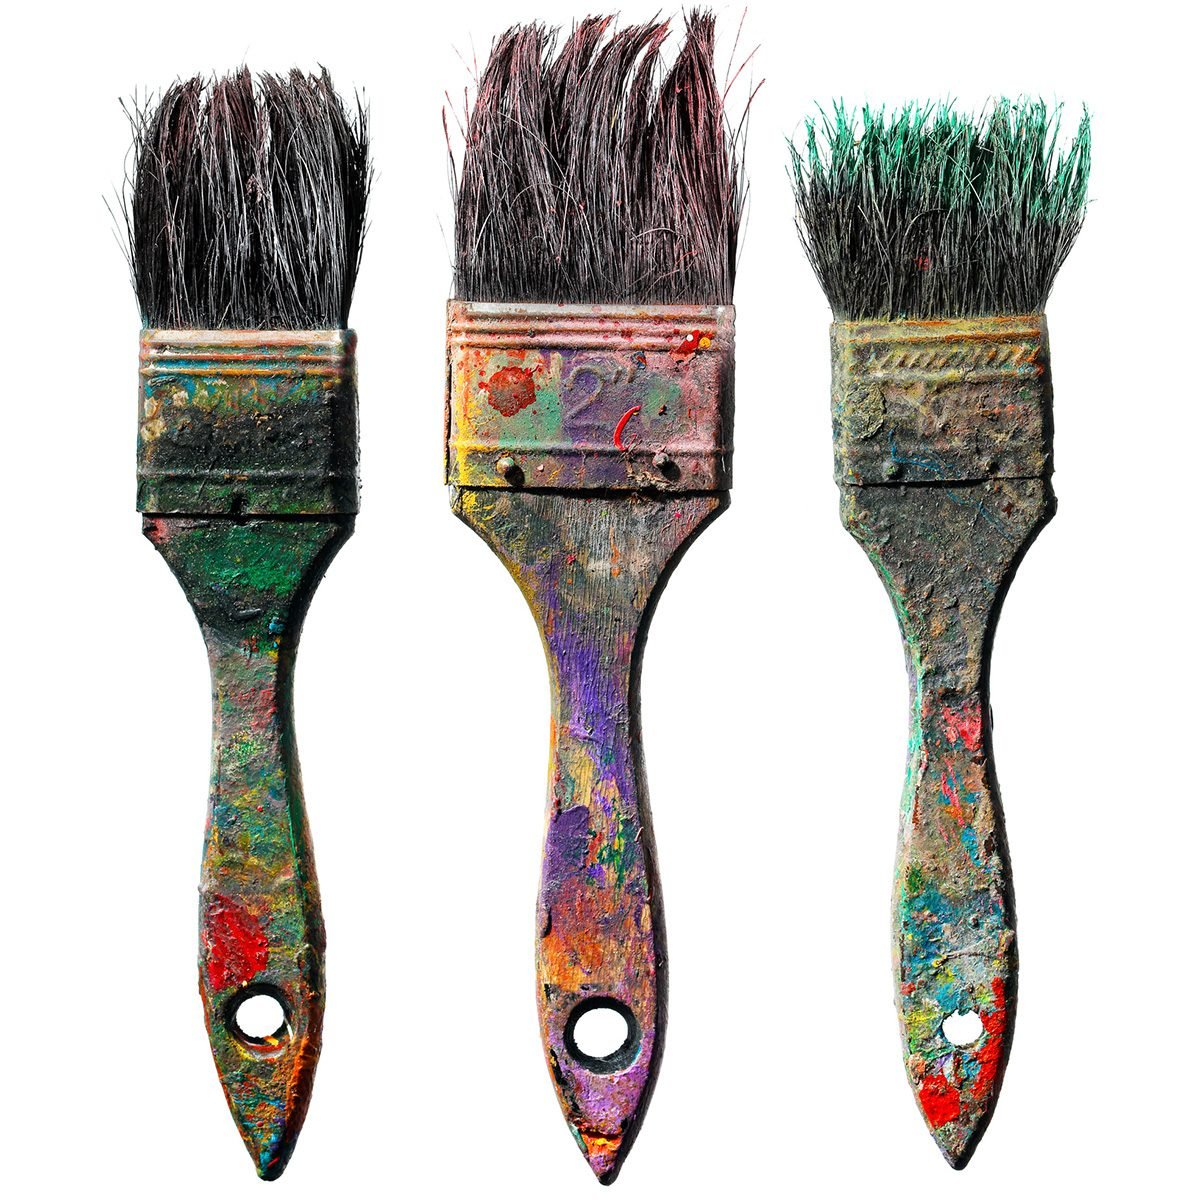 how to clean and store paint brushes